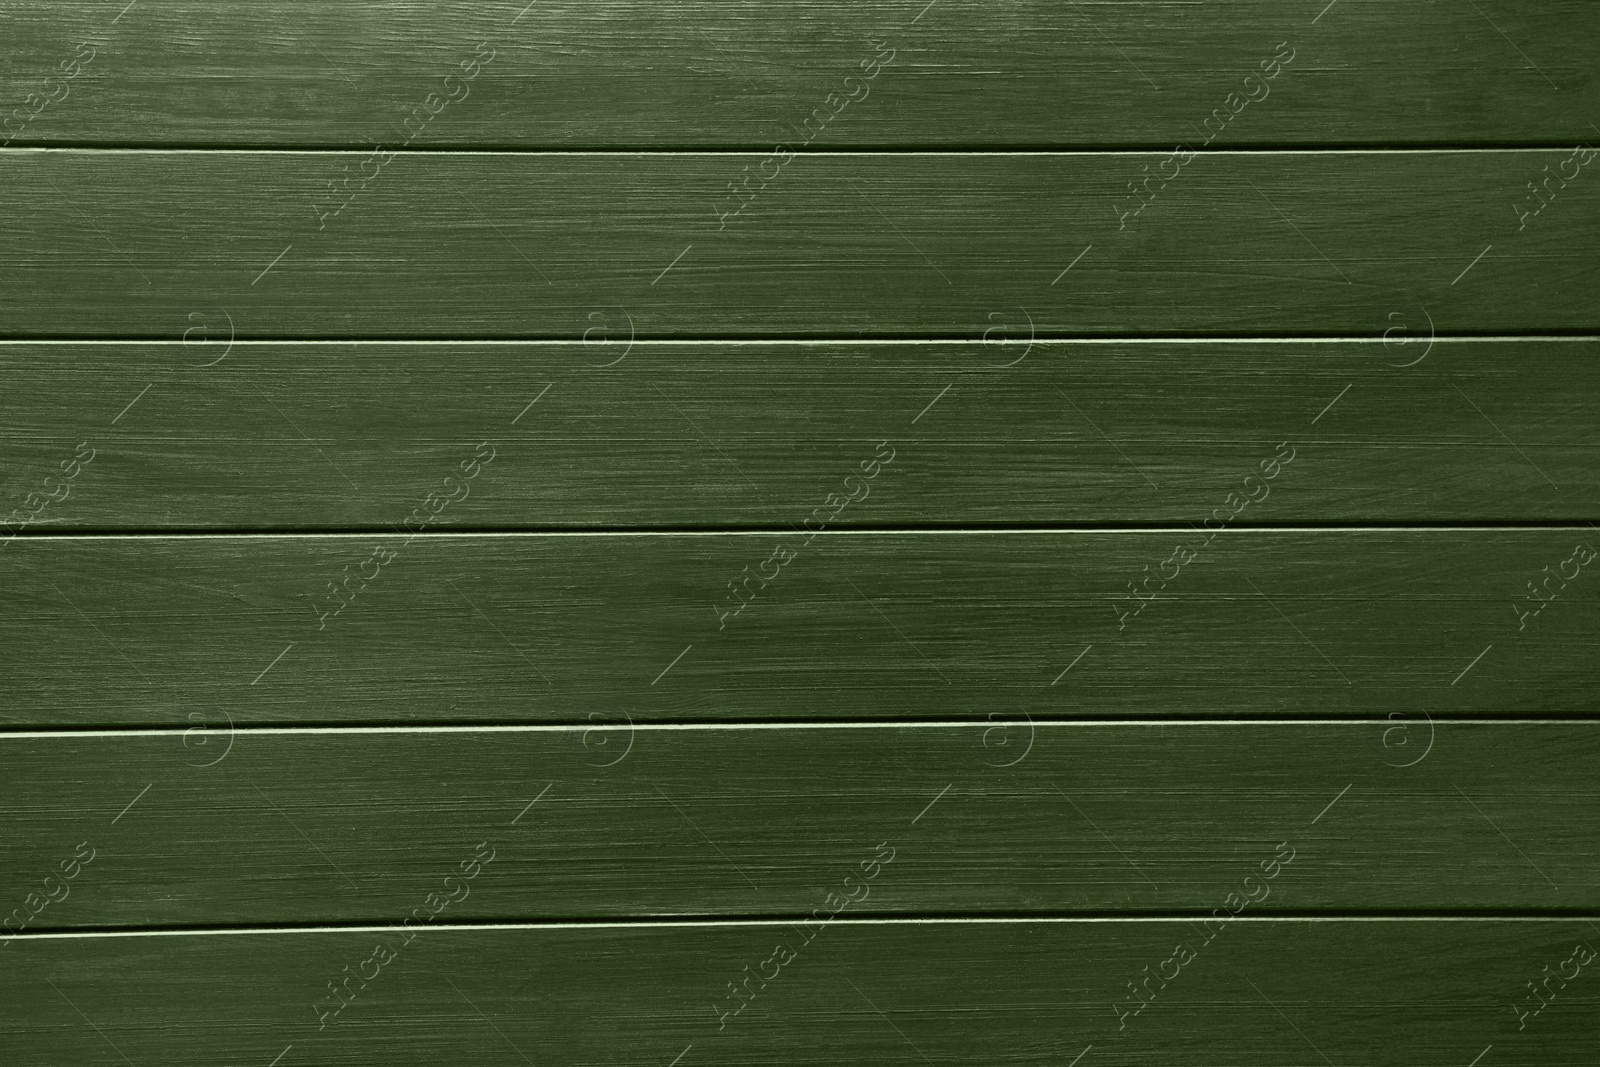 Image of Sage green wooden surface as background, closeup